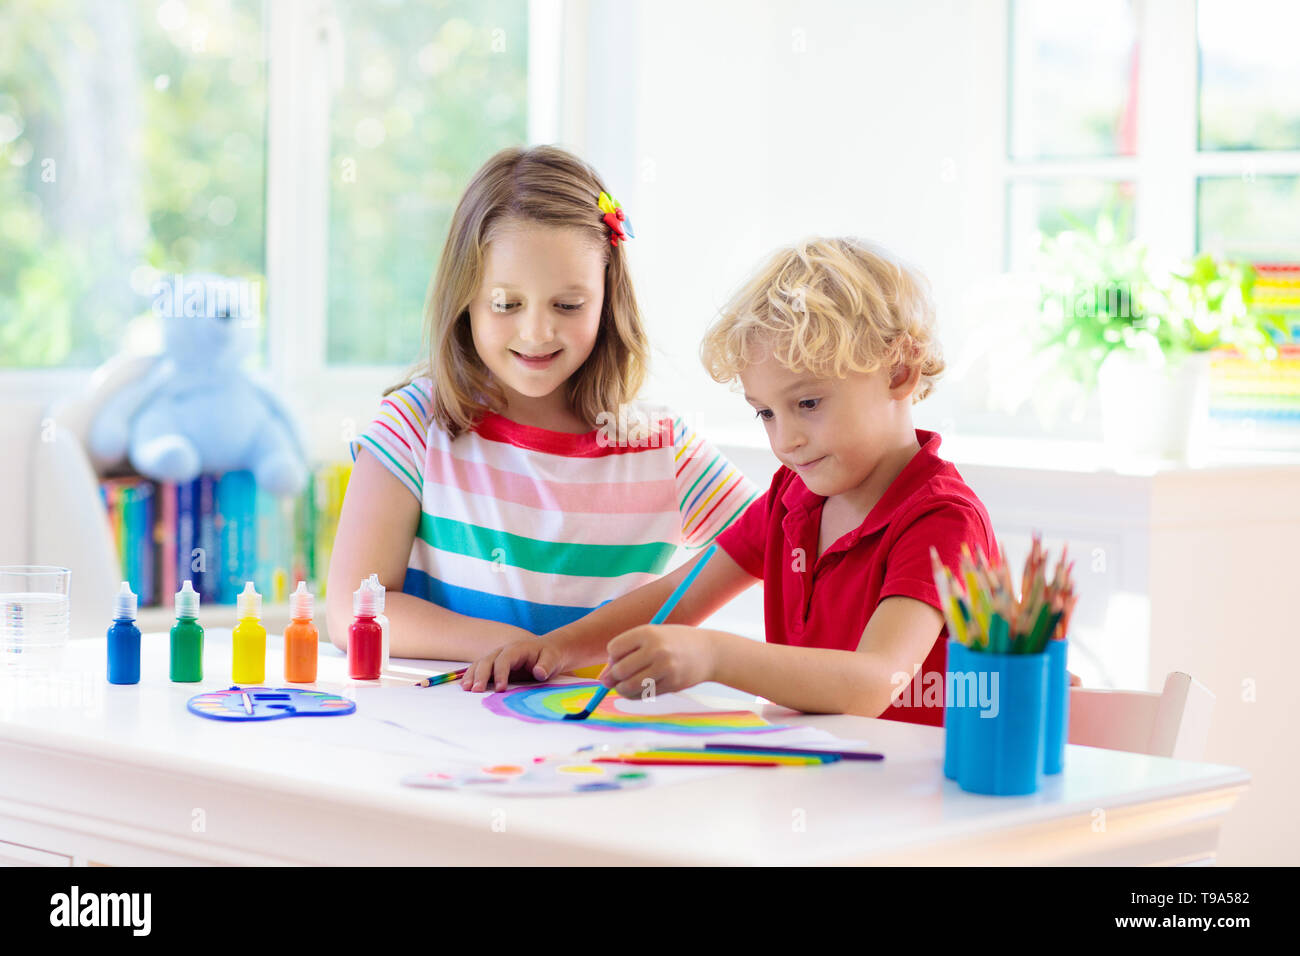 Kids Paint Child Painting In White Sunny Study Room Little Boy